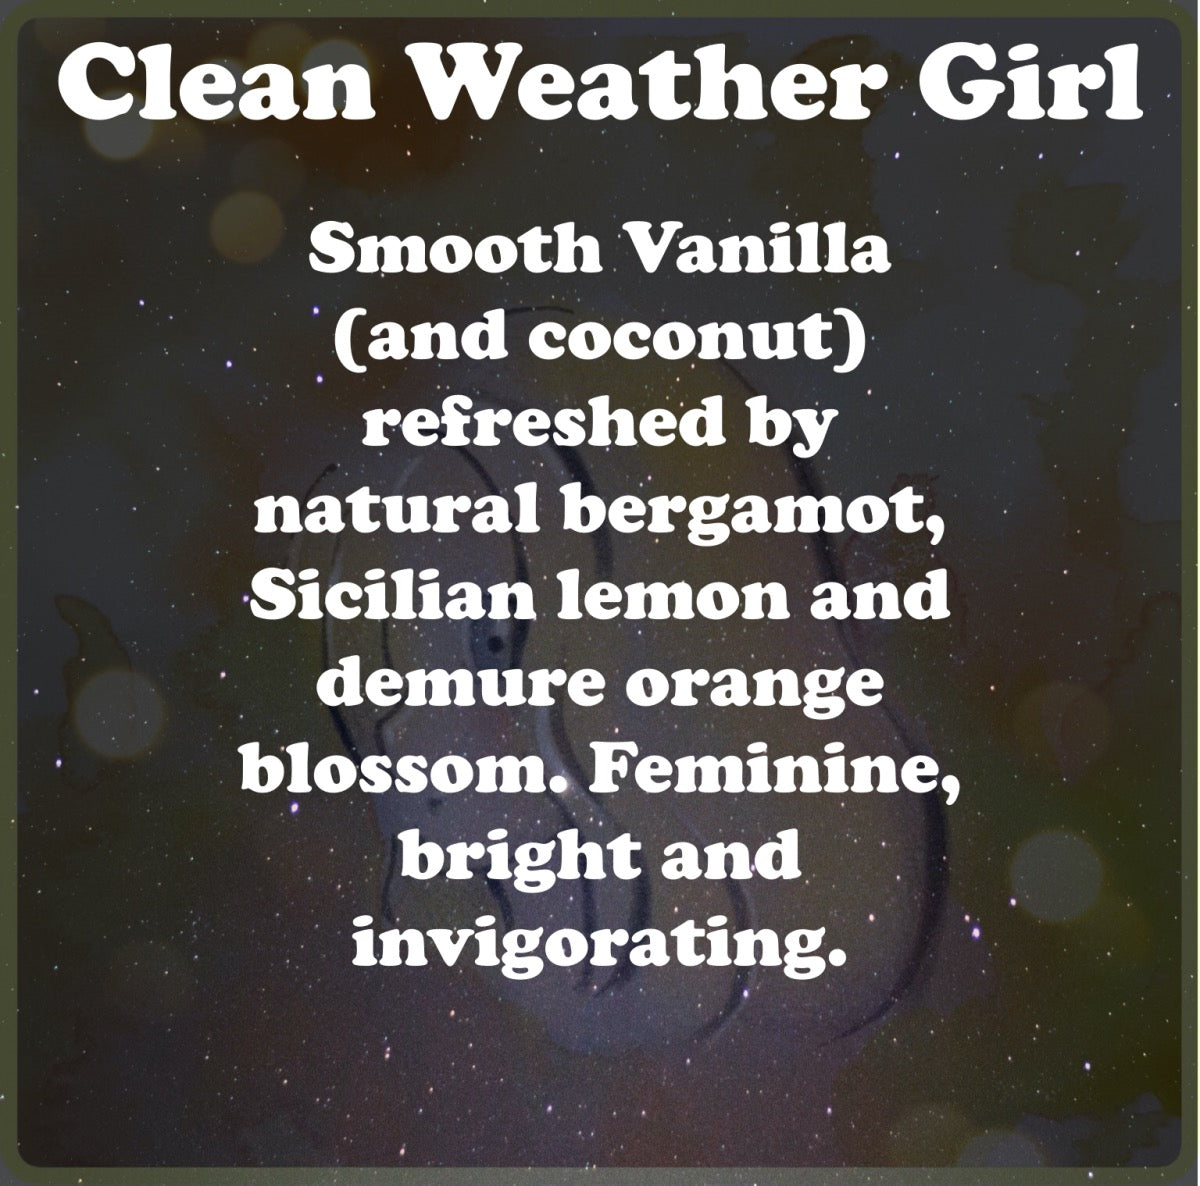 Clean Weather Girl - Stereoplasm